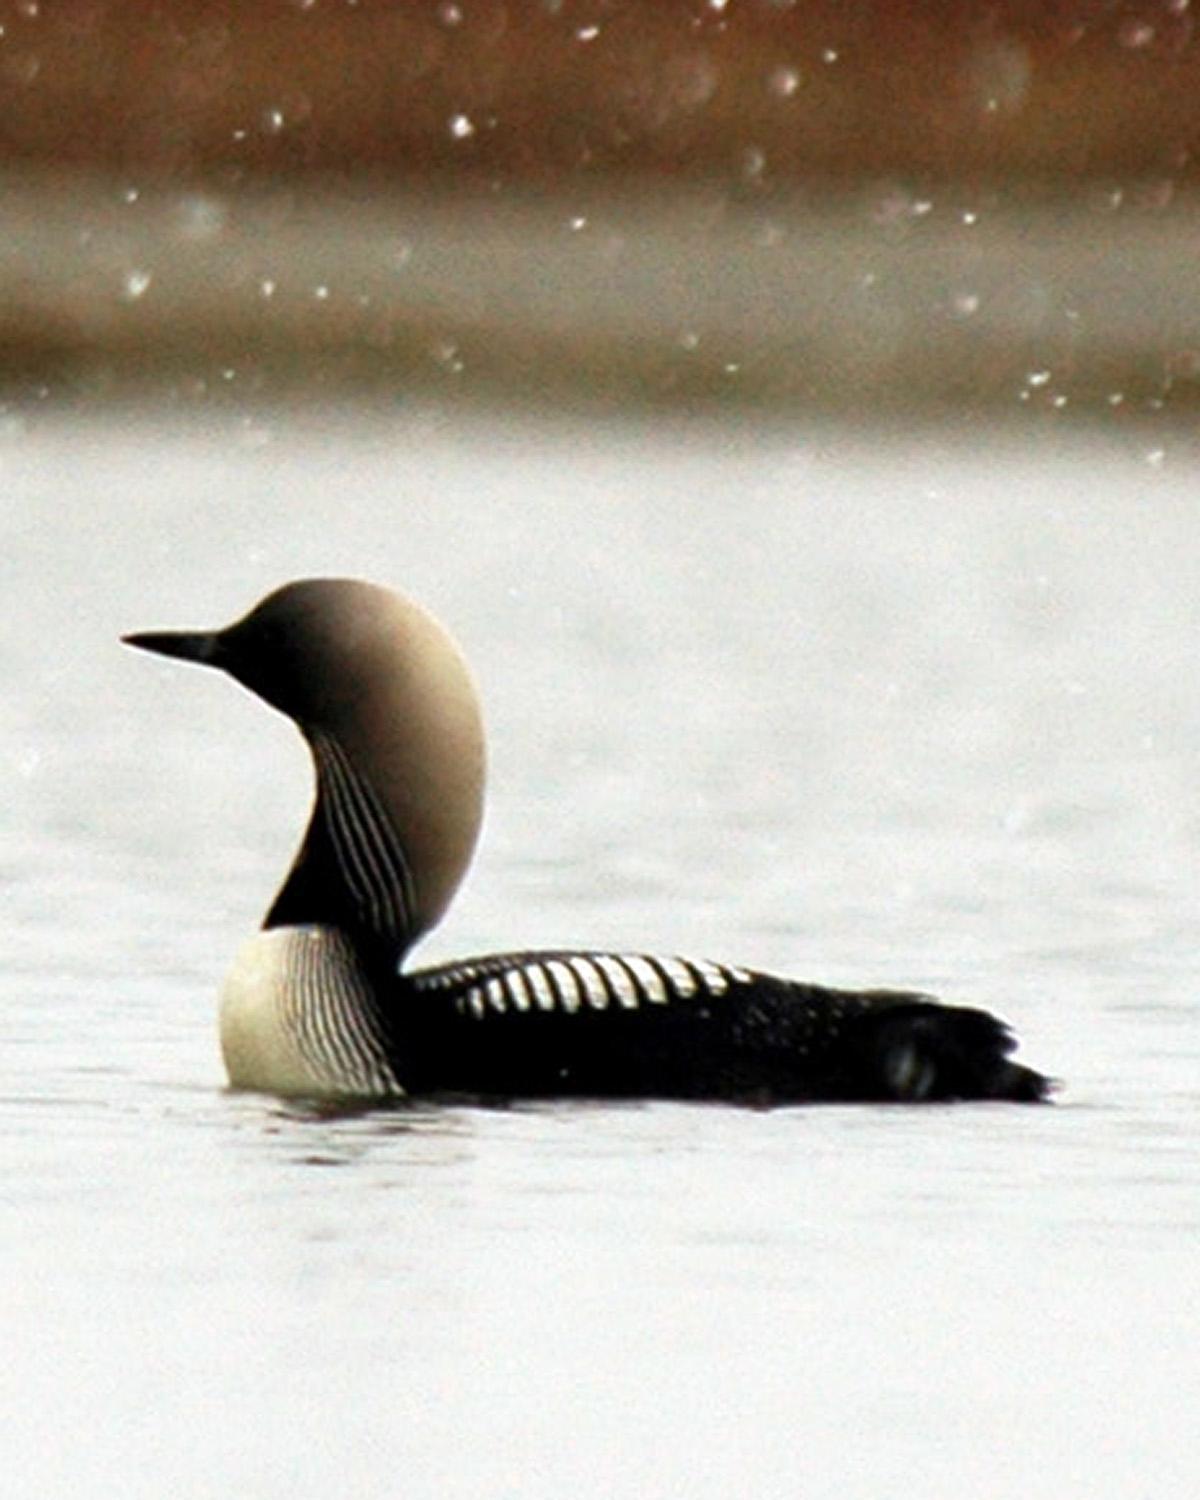 Pacific Loon Photo by Magill Weber